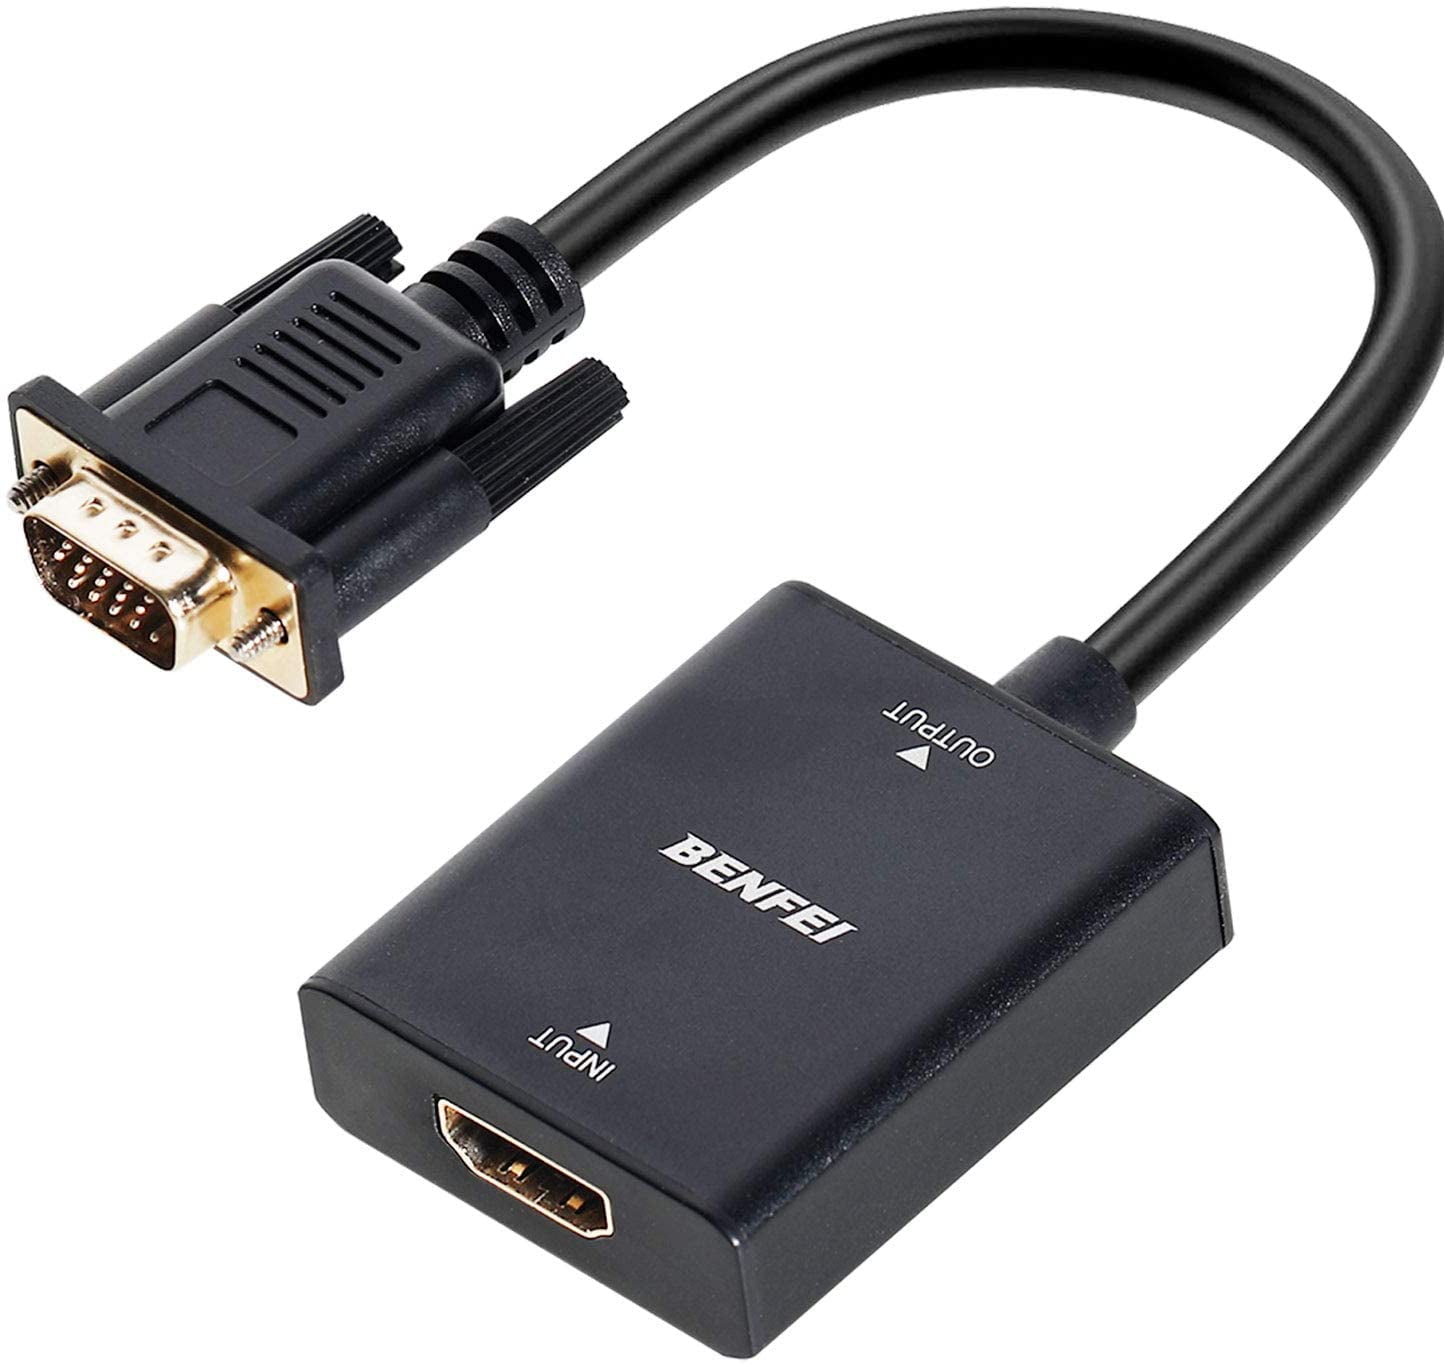 Stable Plug and Play HDMI to VGA Adapter High Speed 1080P HDMI to VGA Converter with Audio Cable for PC Desktops Laptop Projector DVD PS3 Xbox360 Sky HD